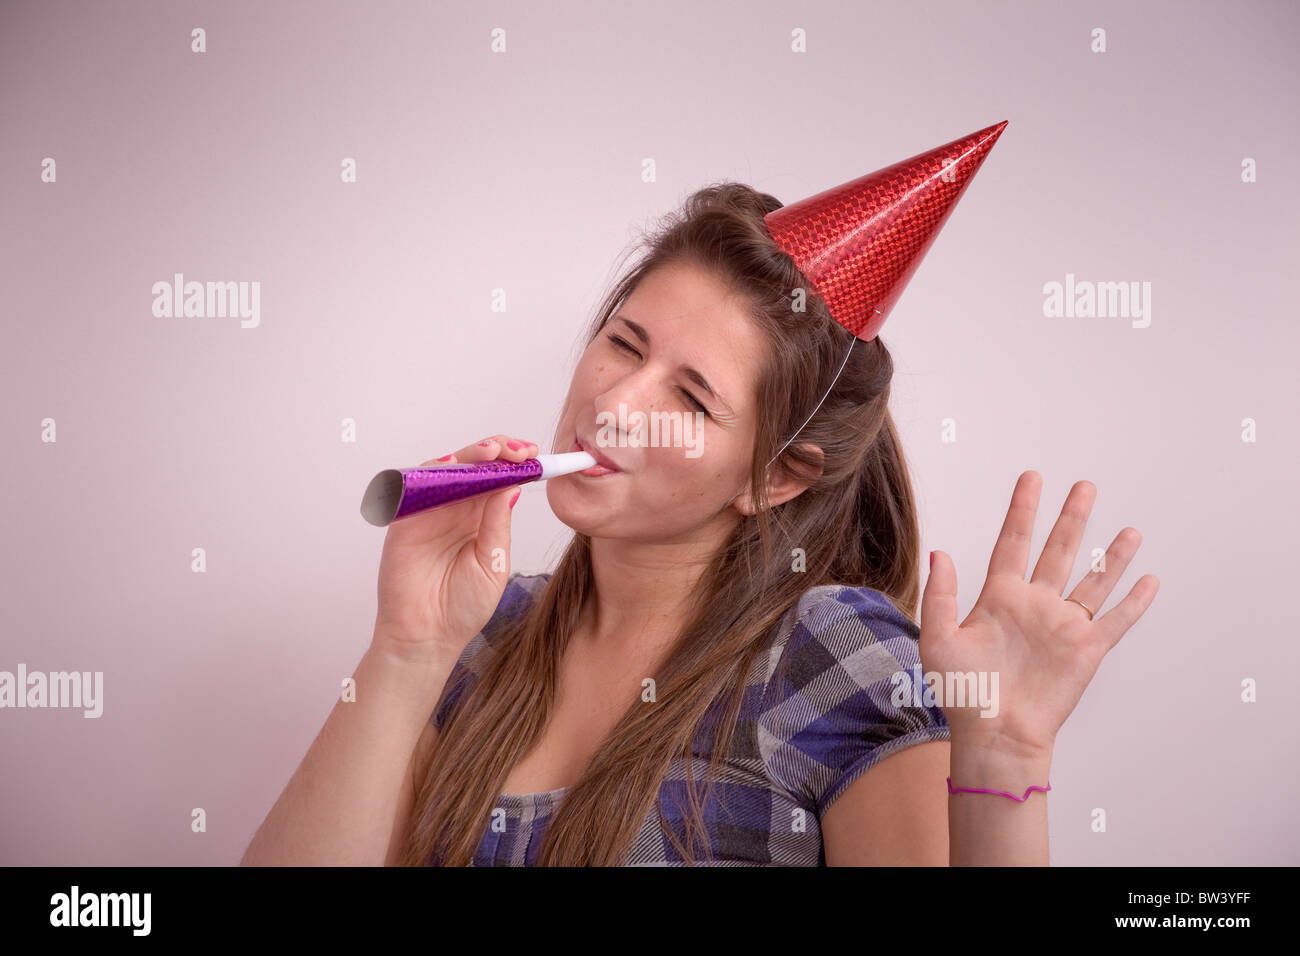 Teen girl (15 years old) with a party hat and noisemaker Stock Photo